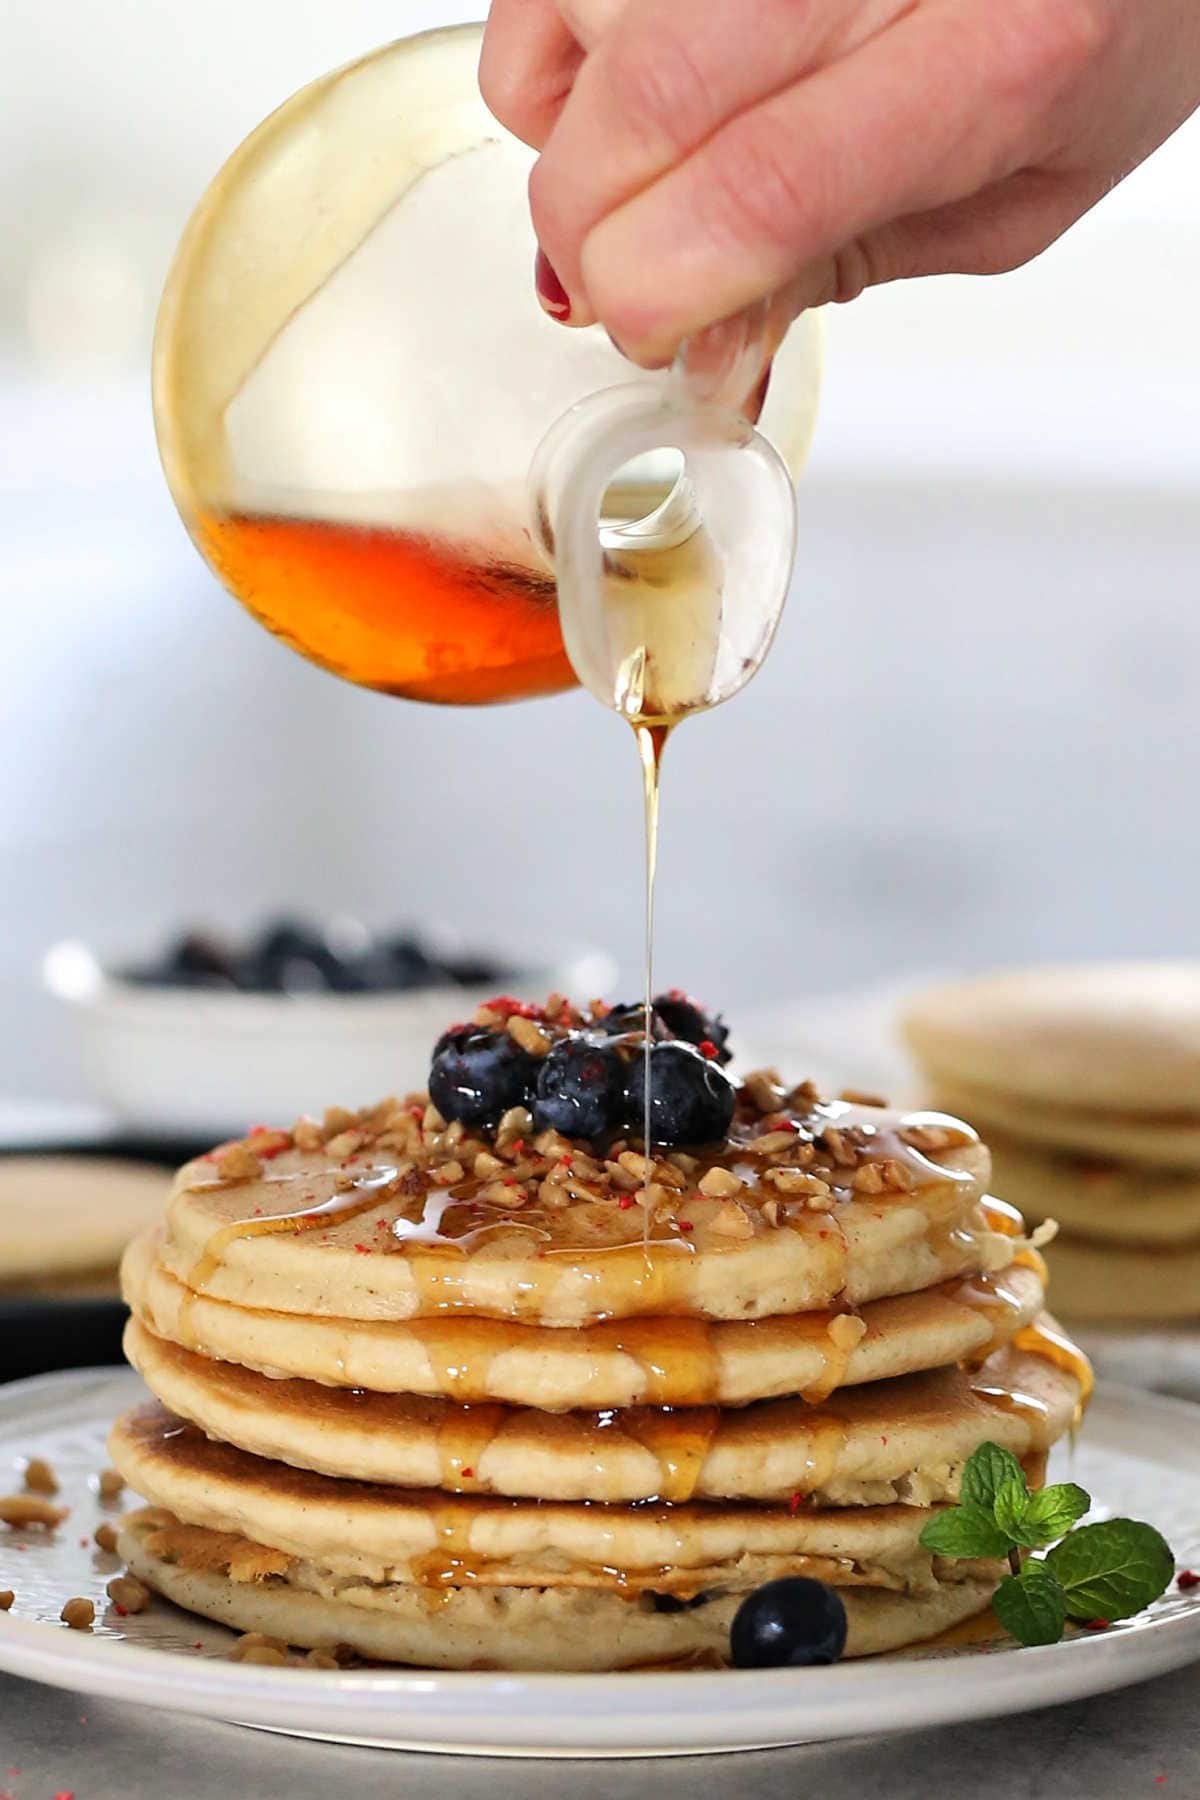 Pouring maple syrup over a stack of pancakes.